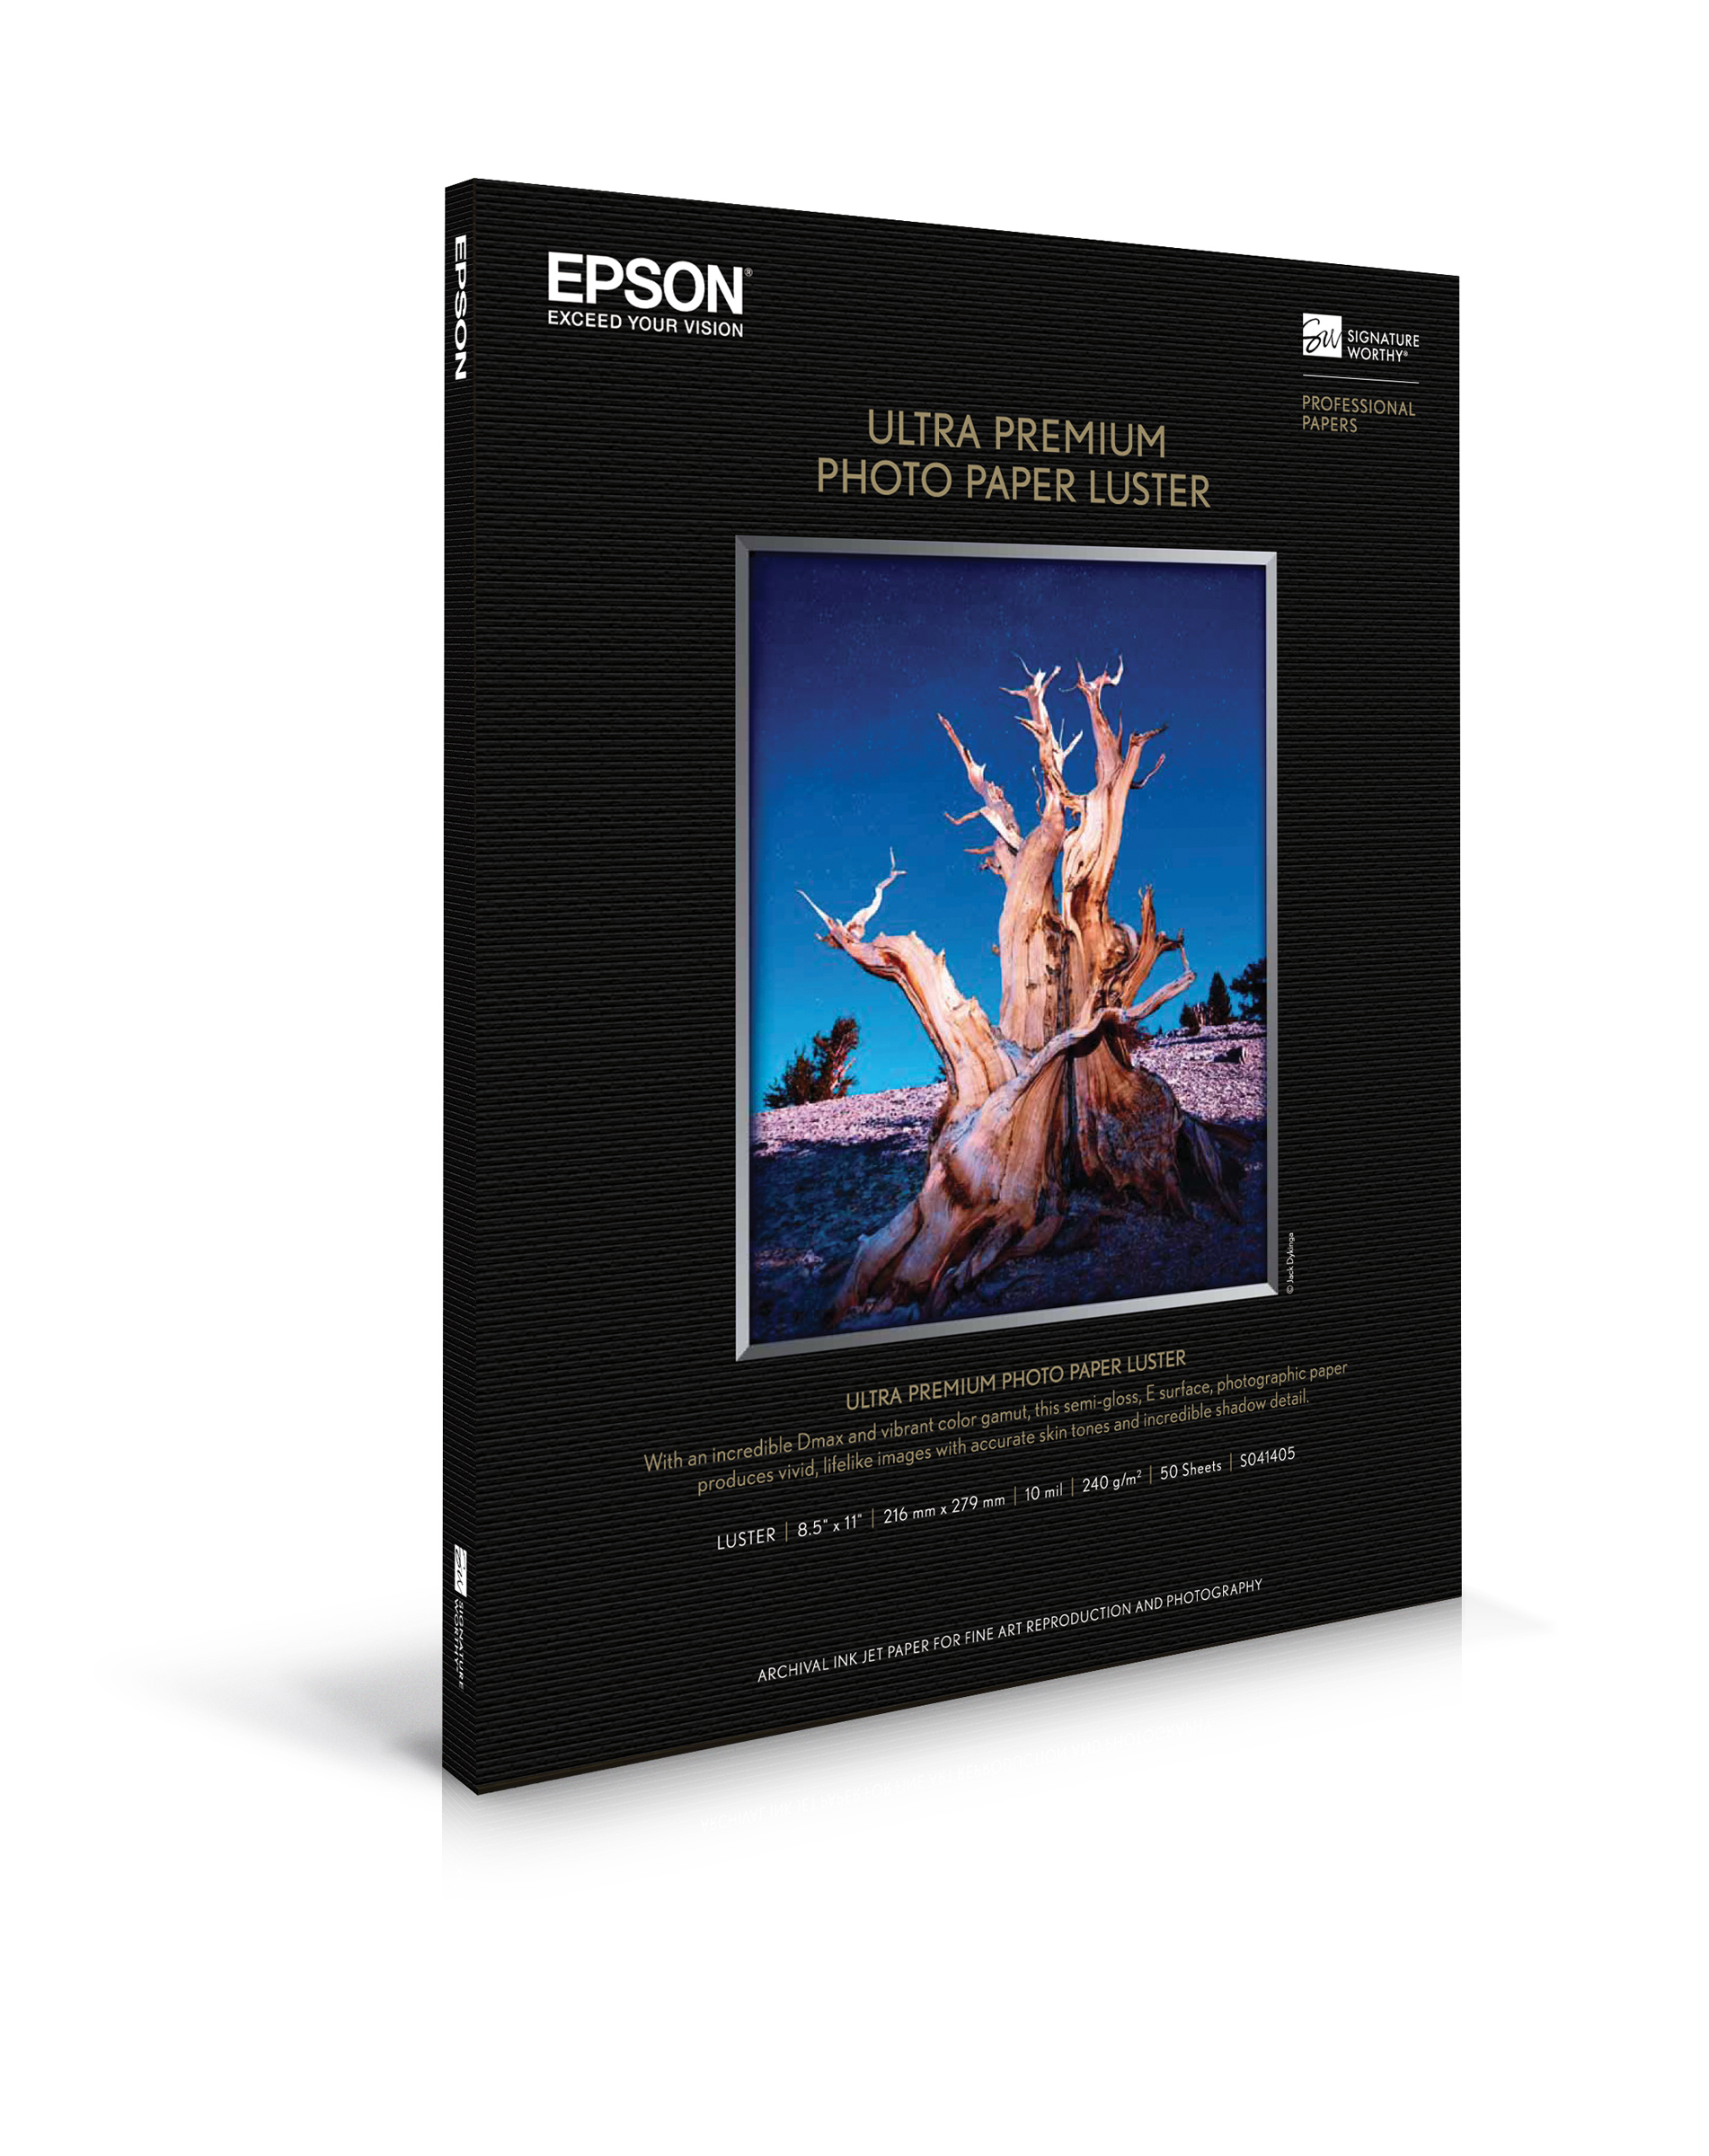 Epson Ultra Premium Luster - 8.5" x 11" 50 Sheets (S041405)